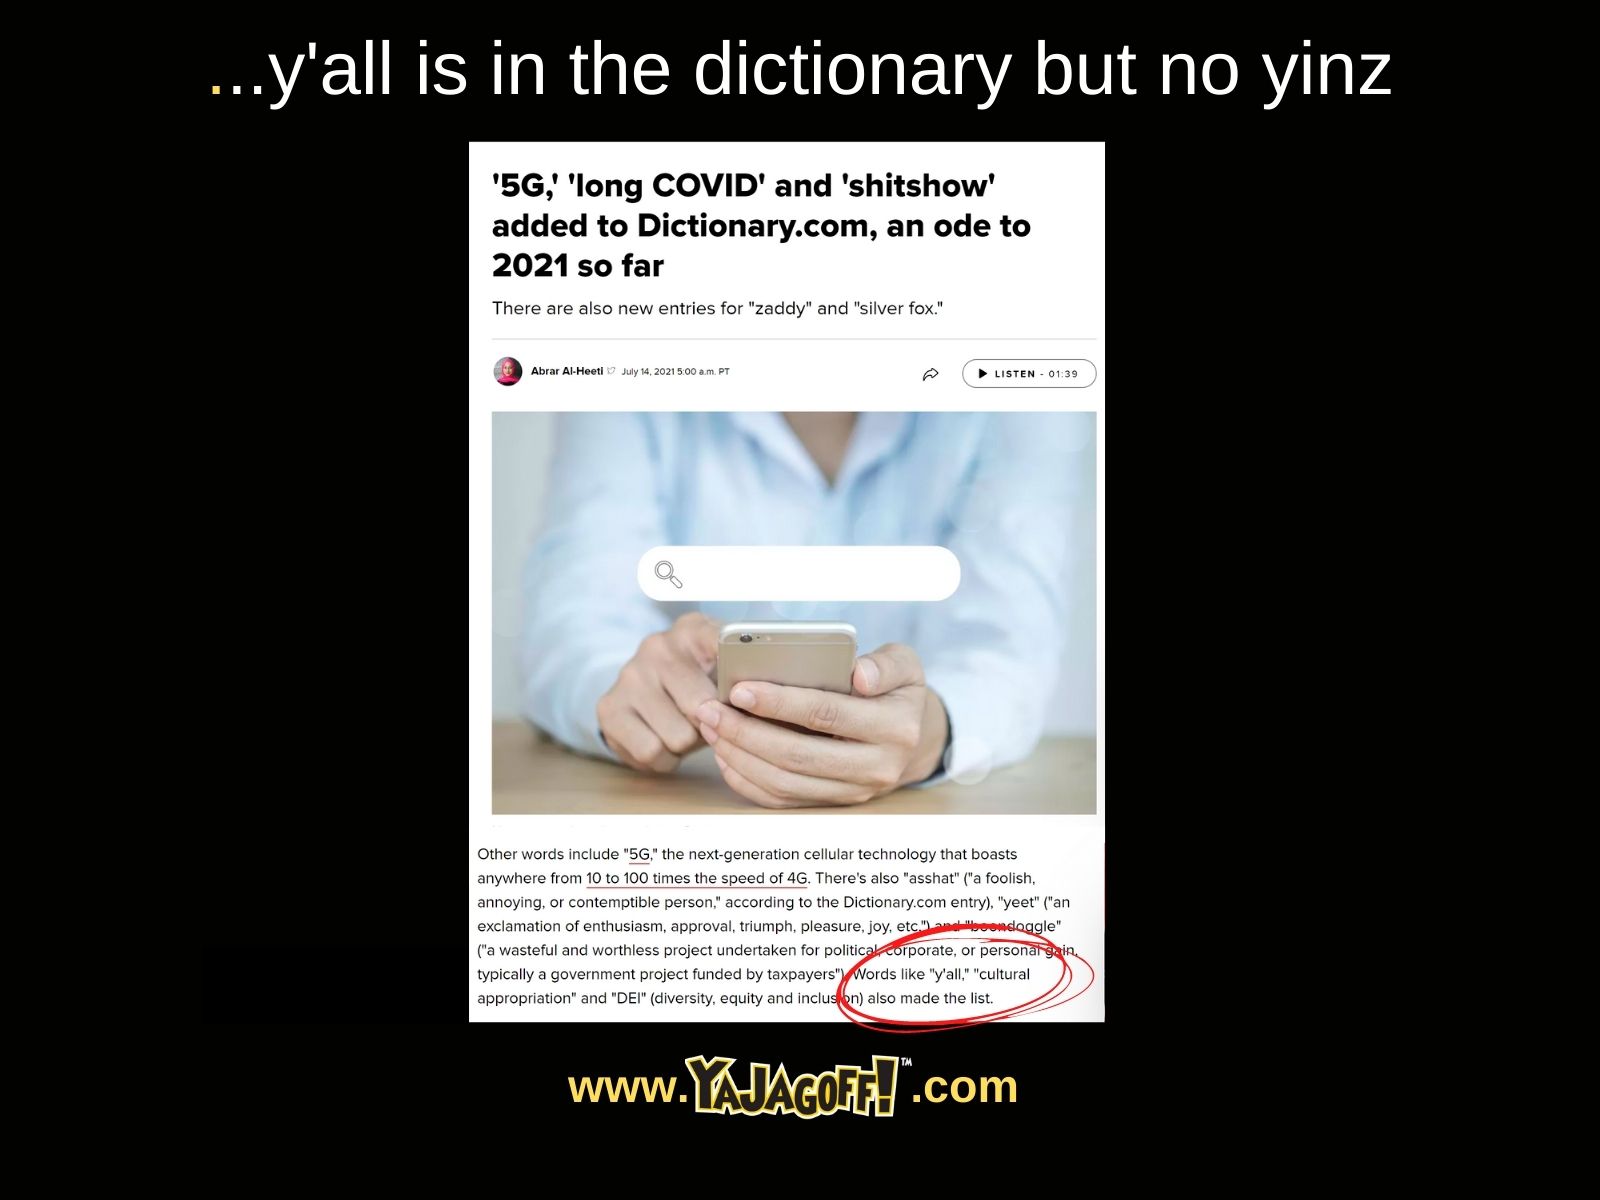 Yinz not in dictionary jagoffs